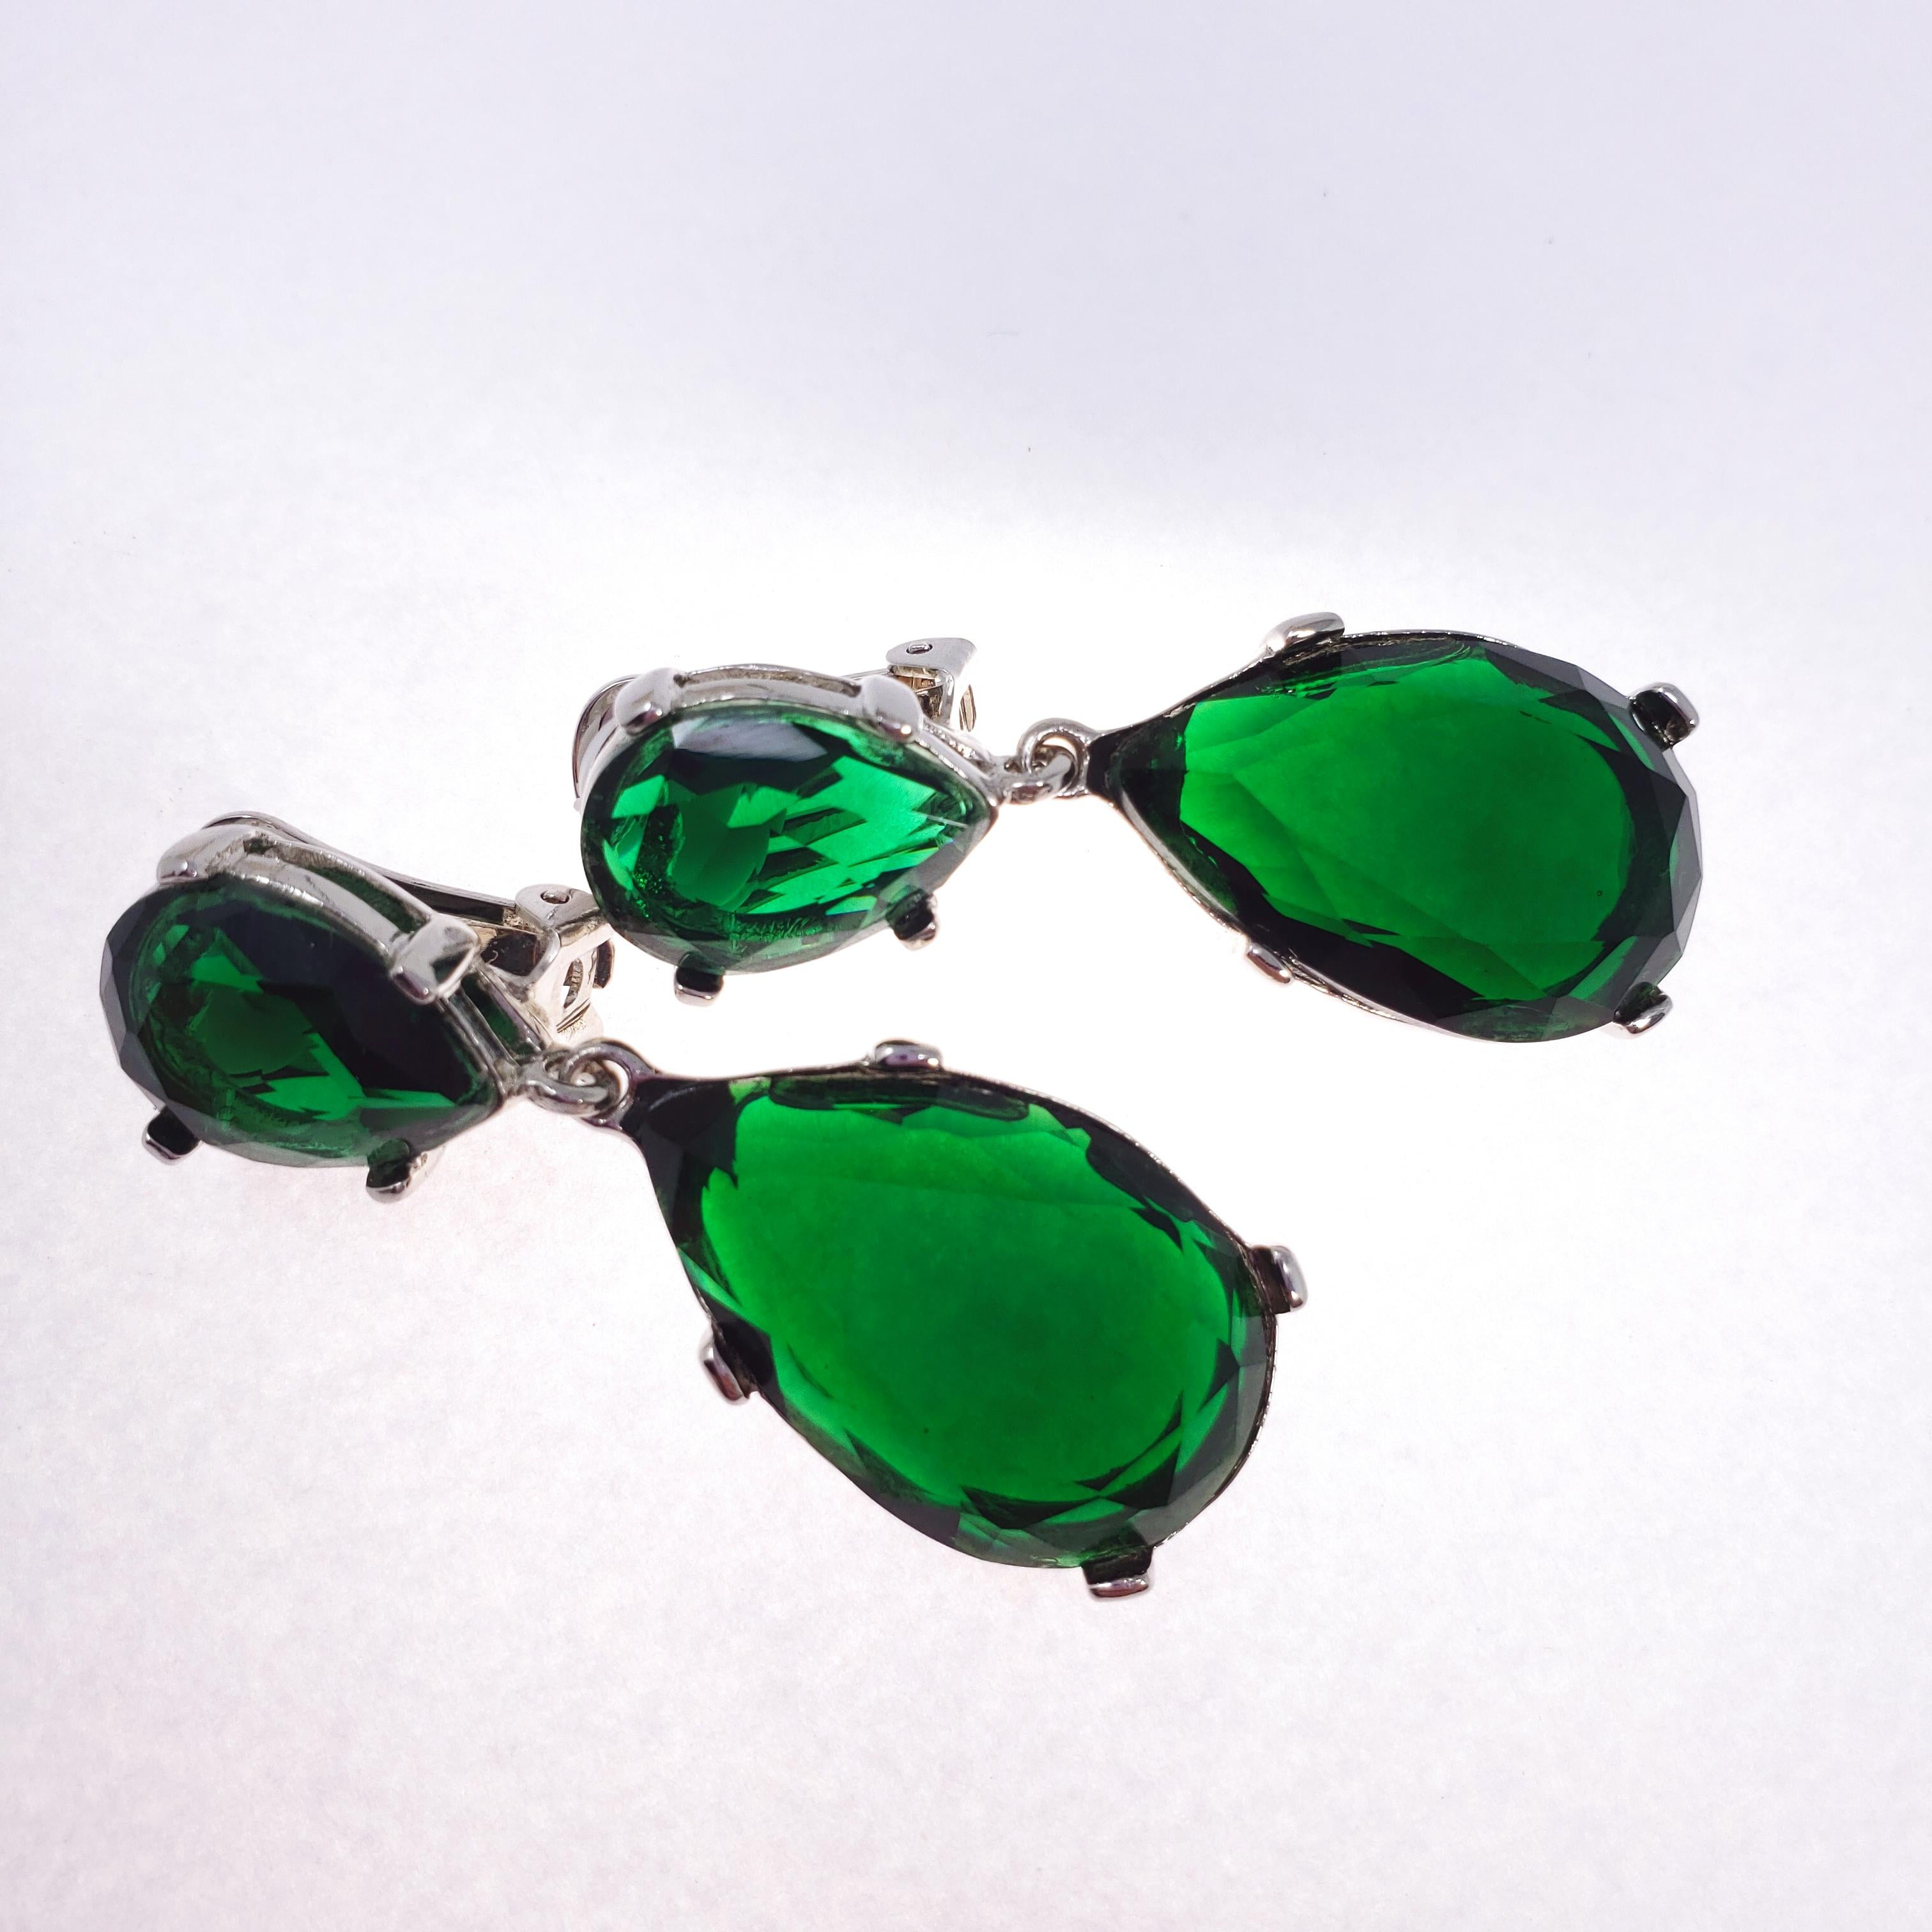 A pair of dangling clip on earrings by Kenneth Jay Lane. Each two teardrop-shaped emerald-colored crystals prong set in open back silver settings. Reflects an elegant, translucent green tone when under light, and a rich, dark green tone